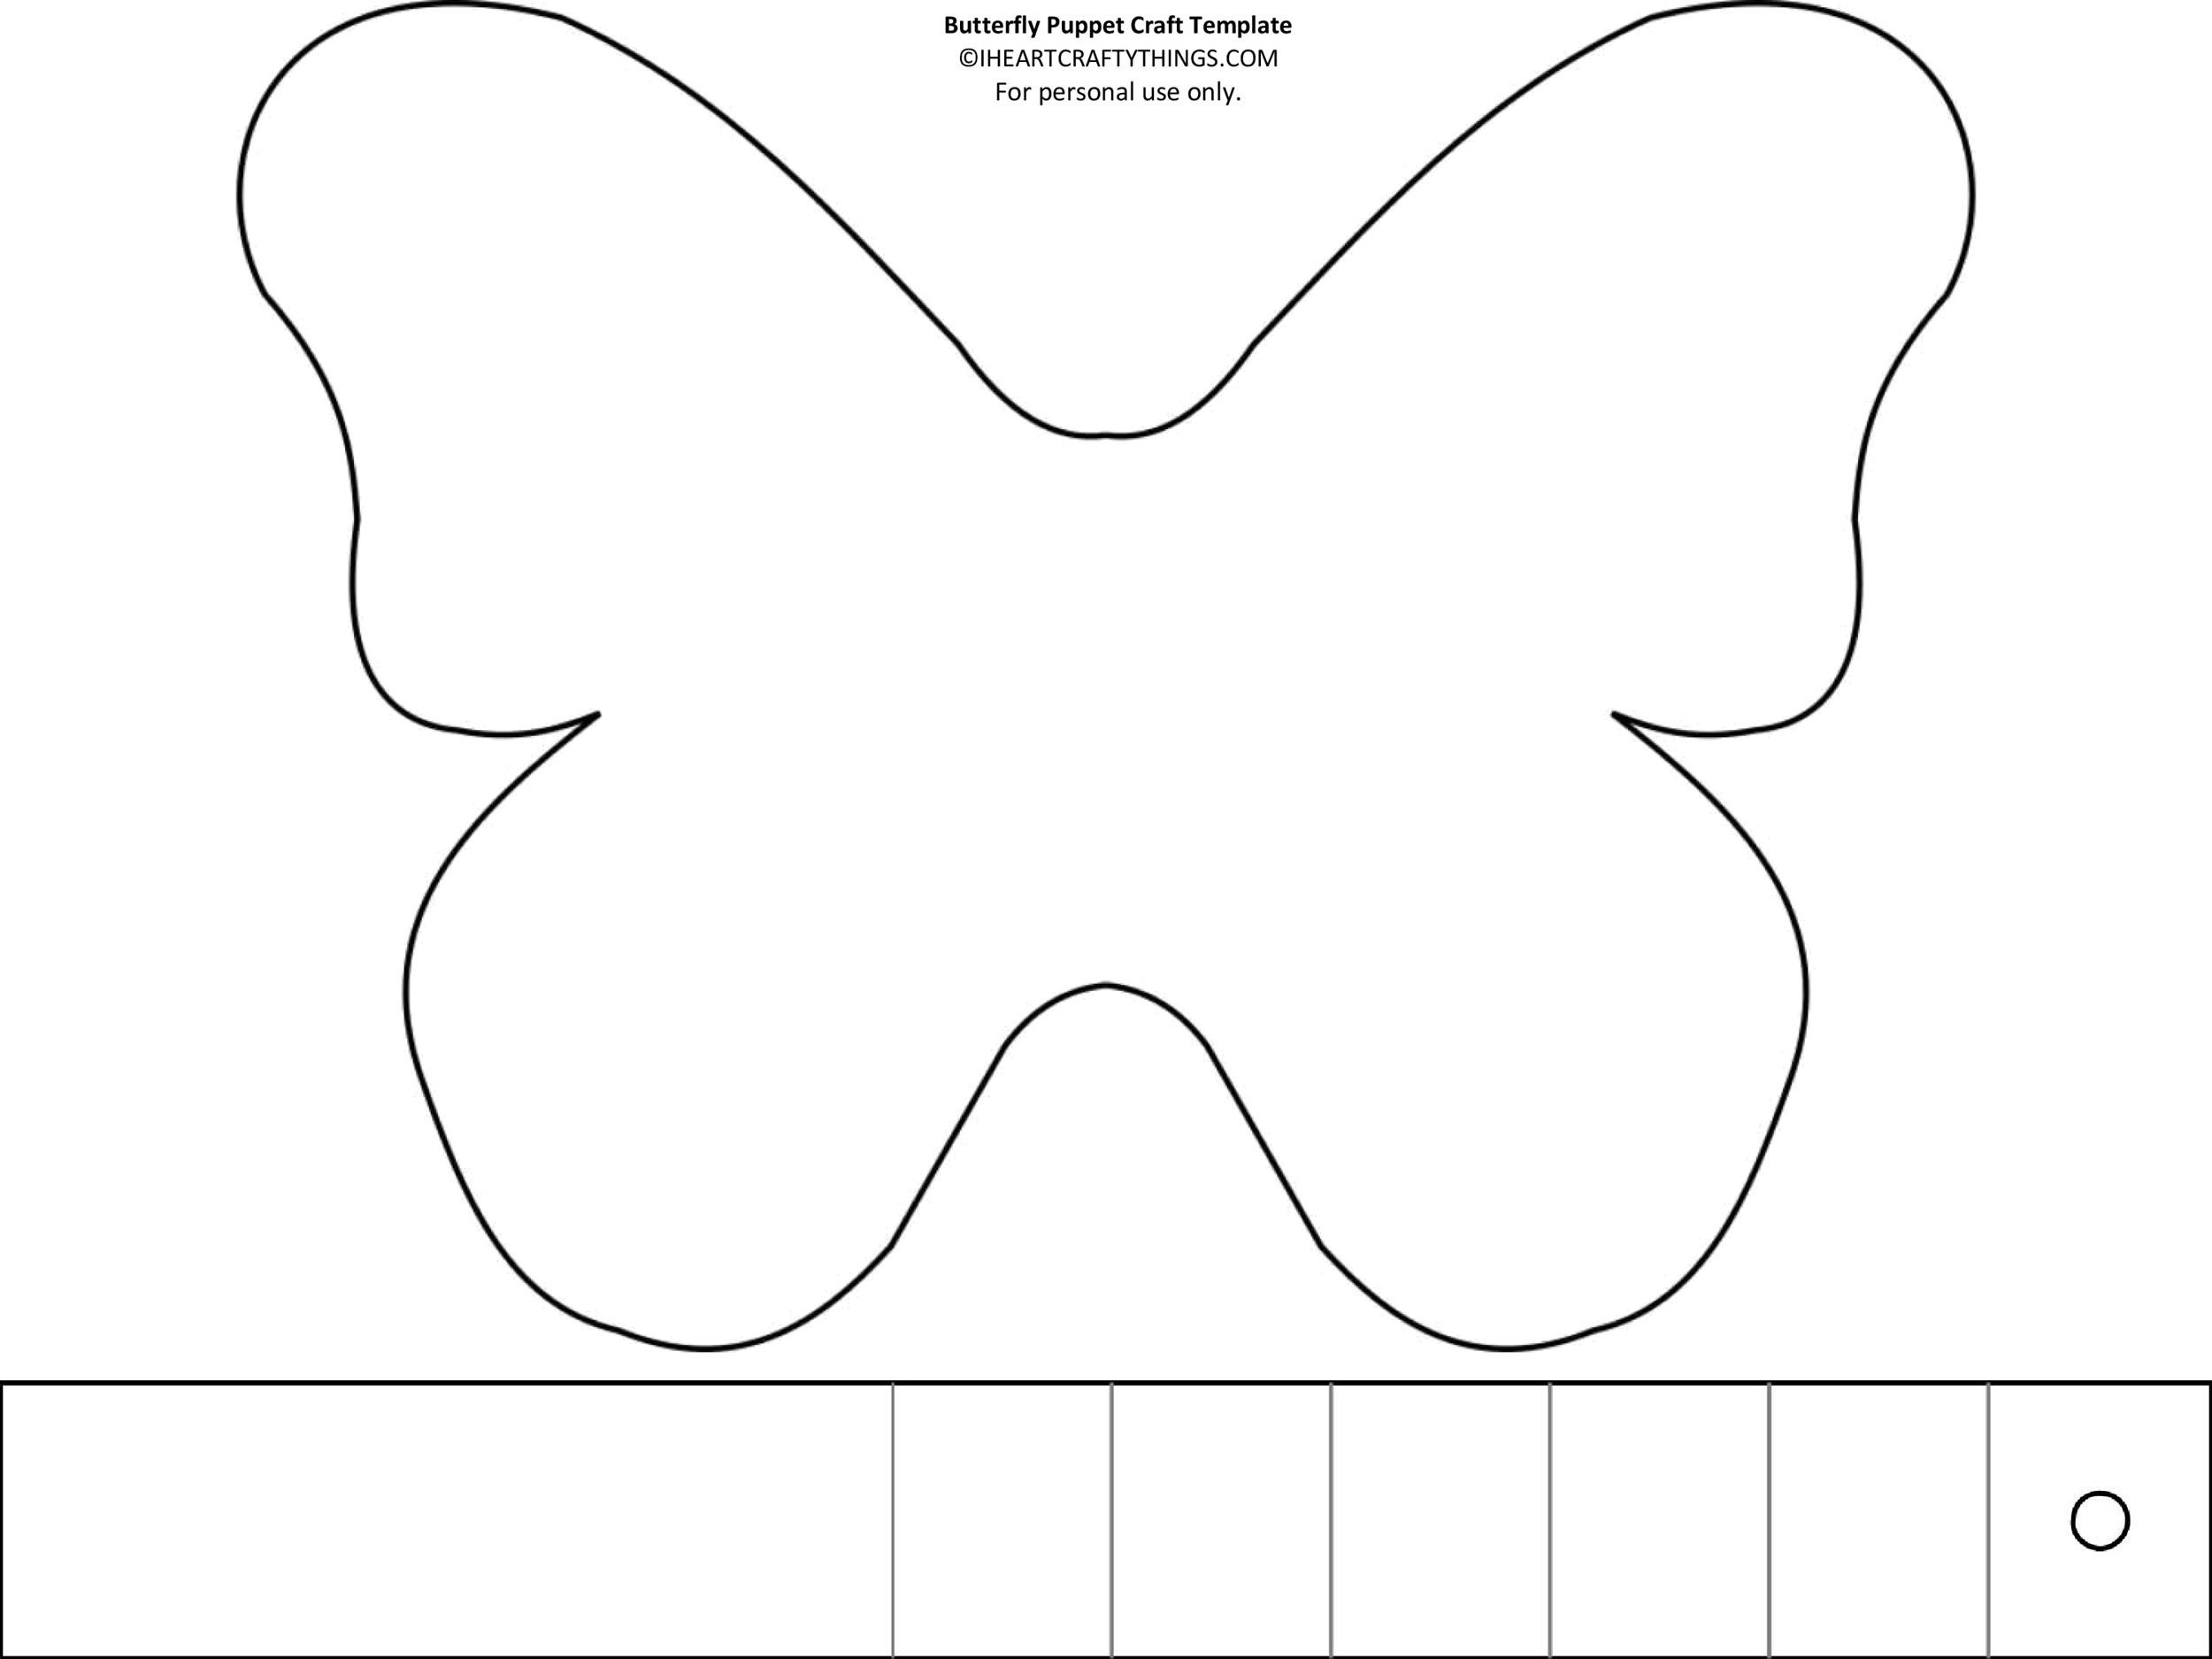 50 Printable Cut Out Butterfly Templates ᐅ TemplateLab